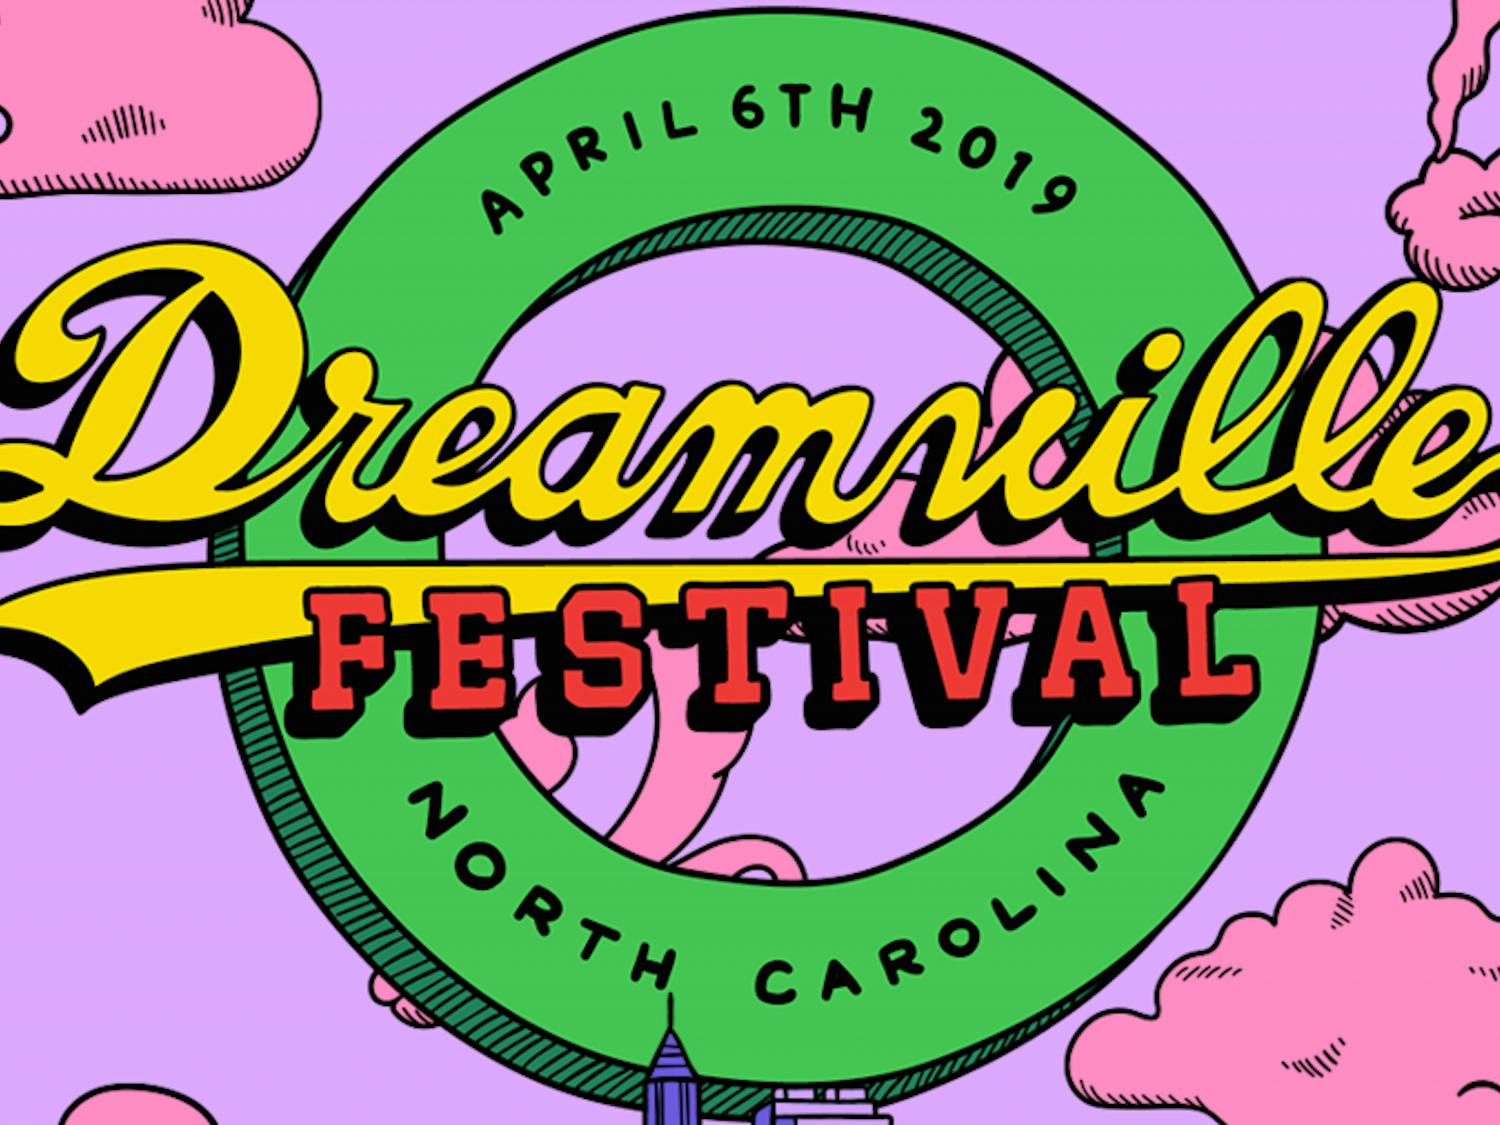 Dreamville Festival will be held in Dorothea Dix Park in Raleigh Saturday. 